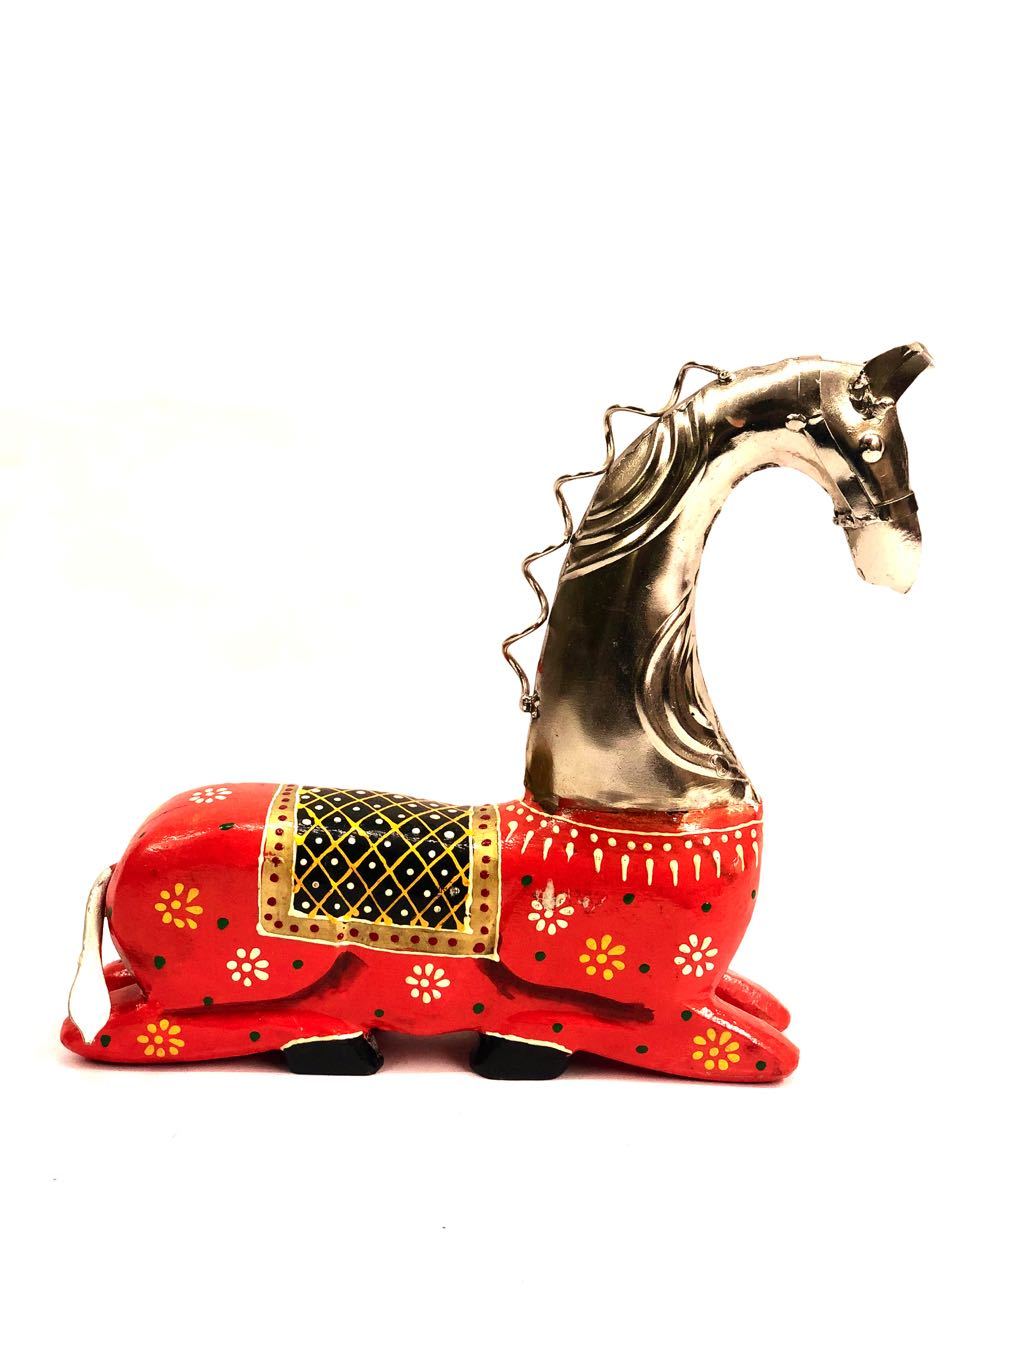 Magnificent Horse Wooden Painted With Metal Spiral Addition Tamrapatra - Tanariri Hastakala